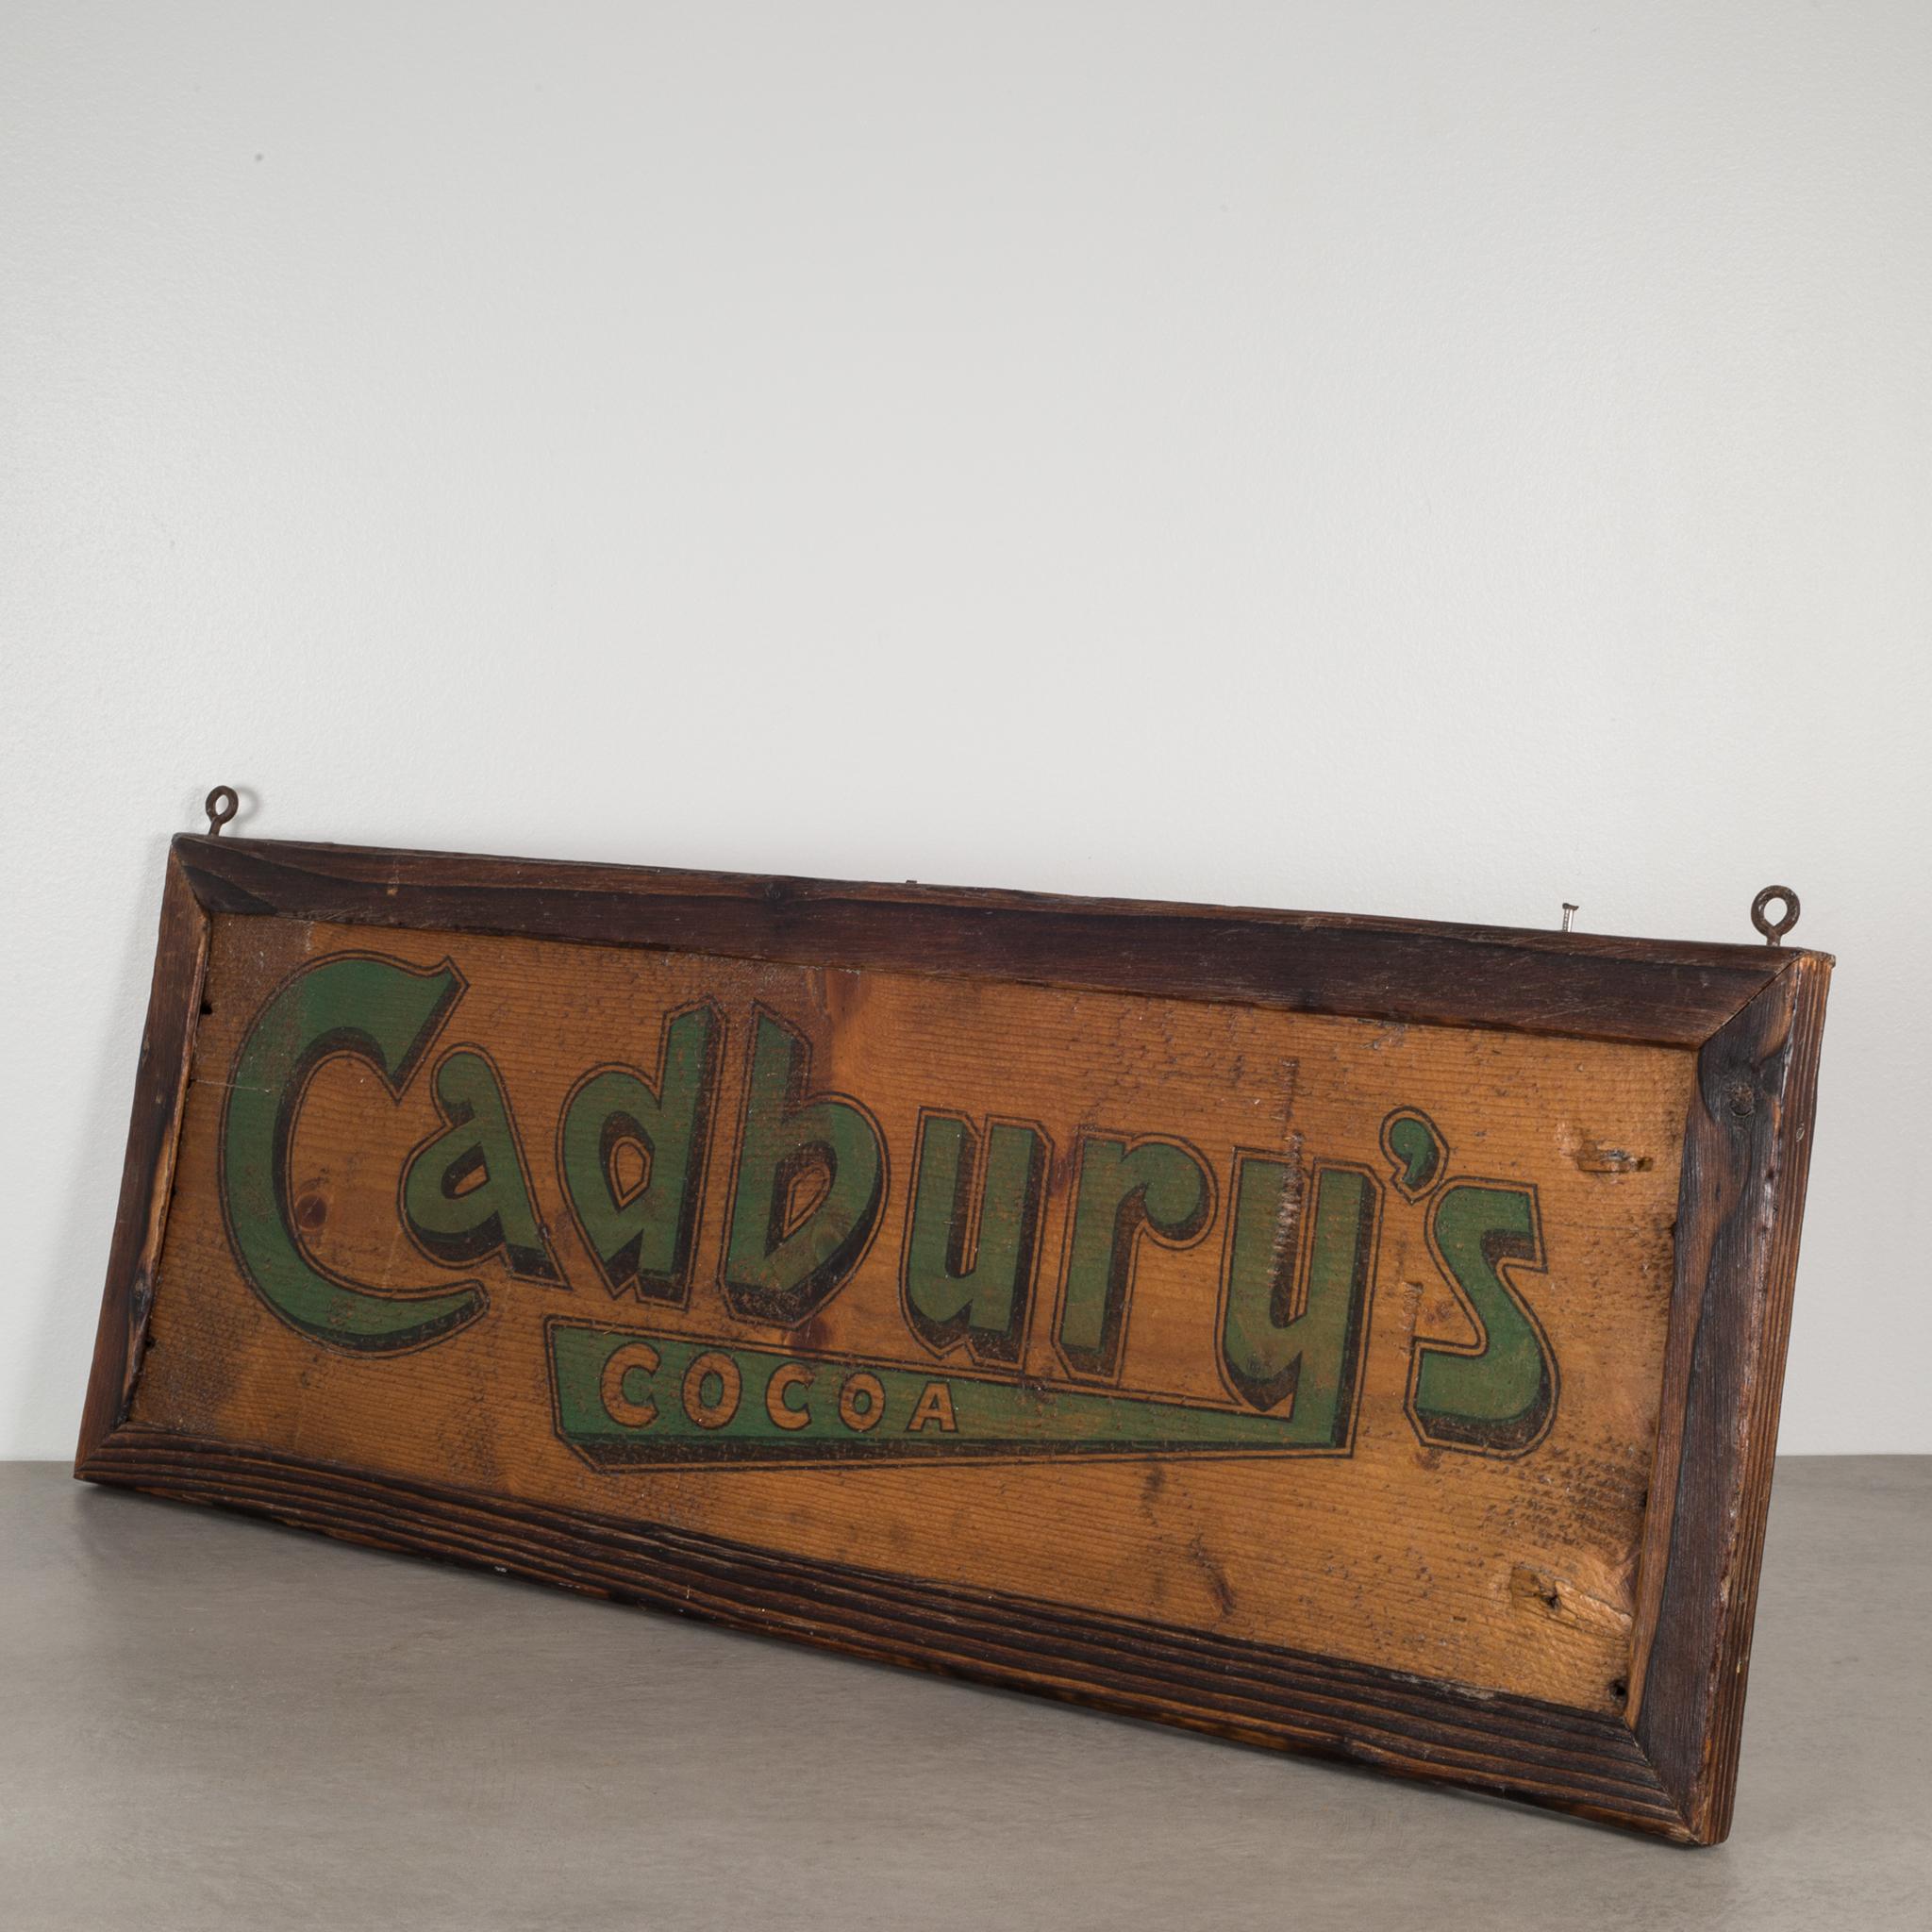 About

This is a rare original wooden Victorian Cadbury's Cocoa framed advertising sign from the UK. This is an early version of the Cadbury's logo dating to the late Victorian era. The wooden panel originates from a large packing crate probably